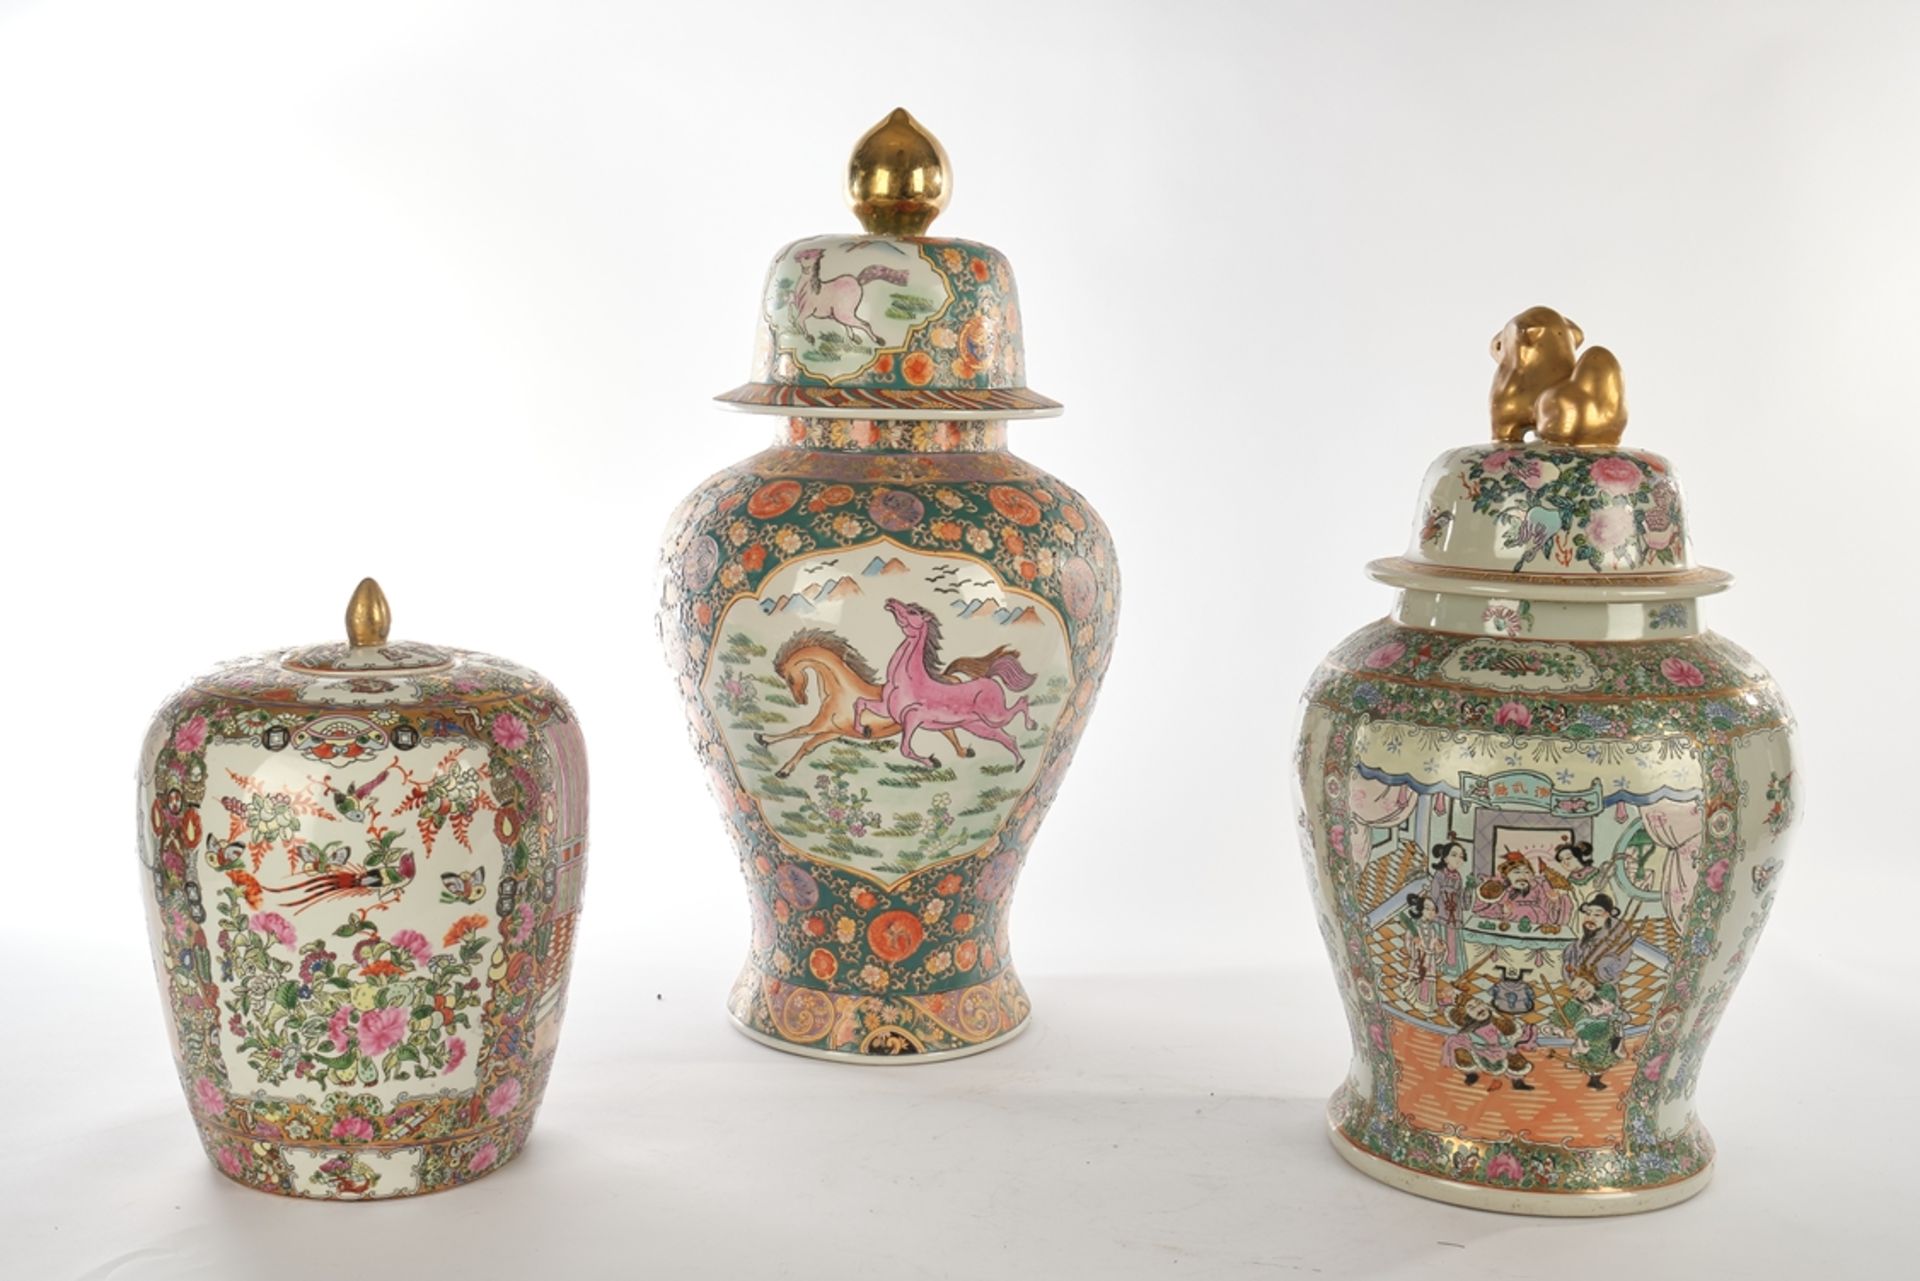 Convolute of 3 lidded vases, China, modern, porcelain, famille rose decorations, various, in Canton - Image 2 of 5